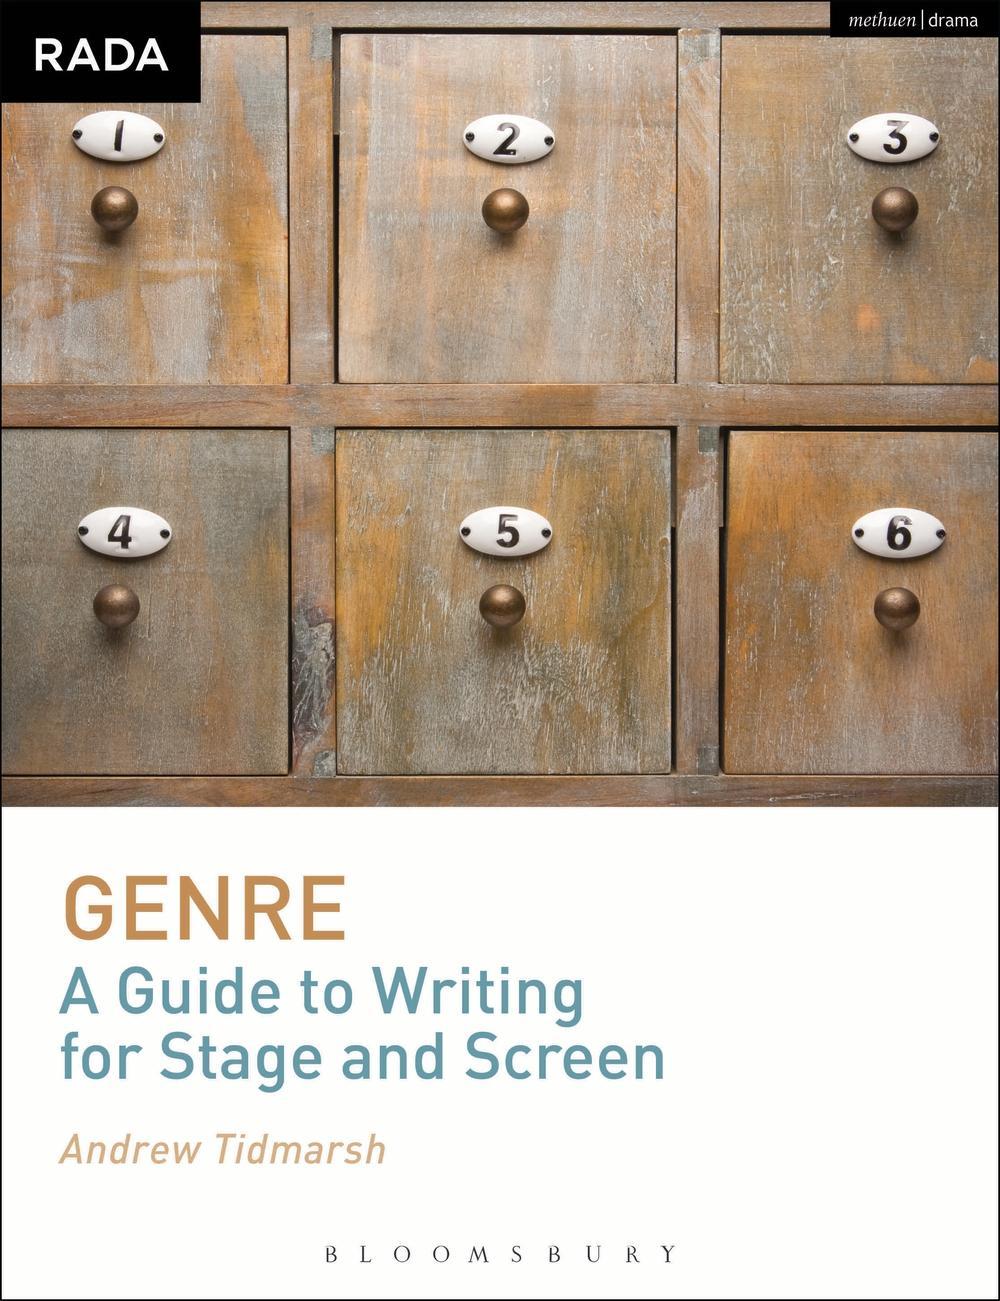 Genre: A Guide to Writing for Stage and Screen - Andrew Tidmarsh